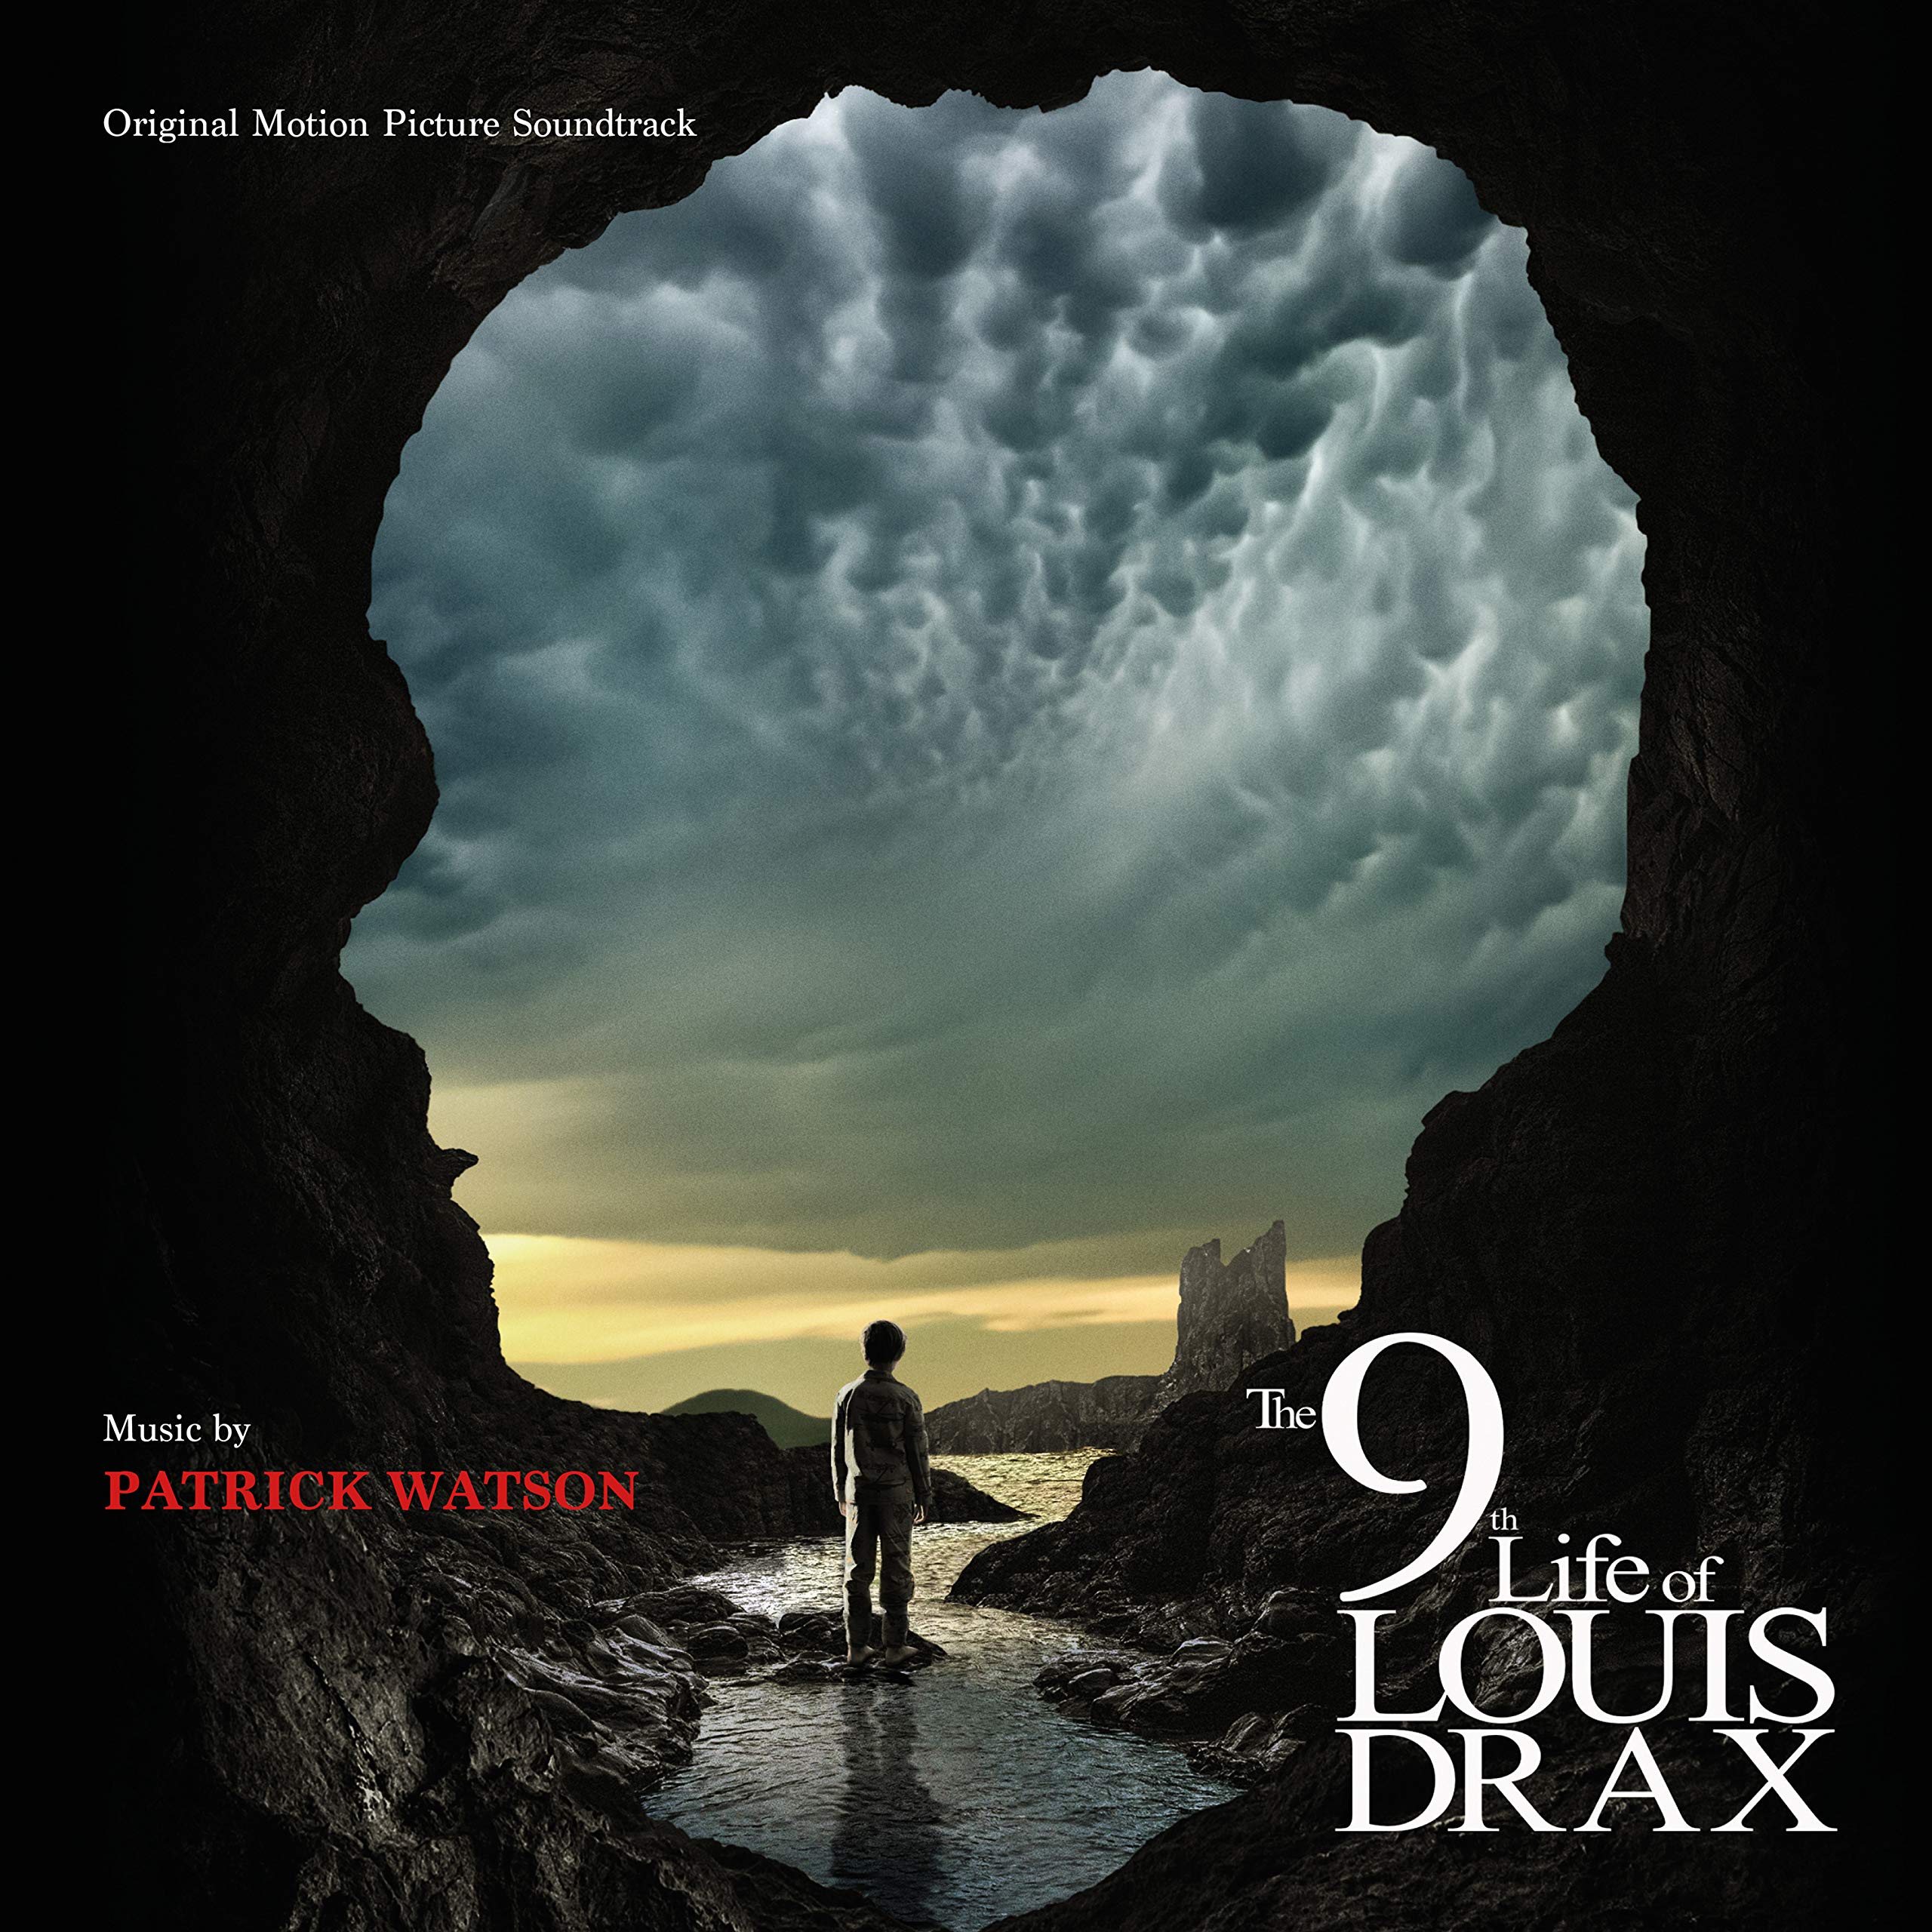 The 9th Life of Louis Drax – Original Motion Picture Soundtrack on MovieShack